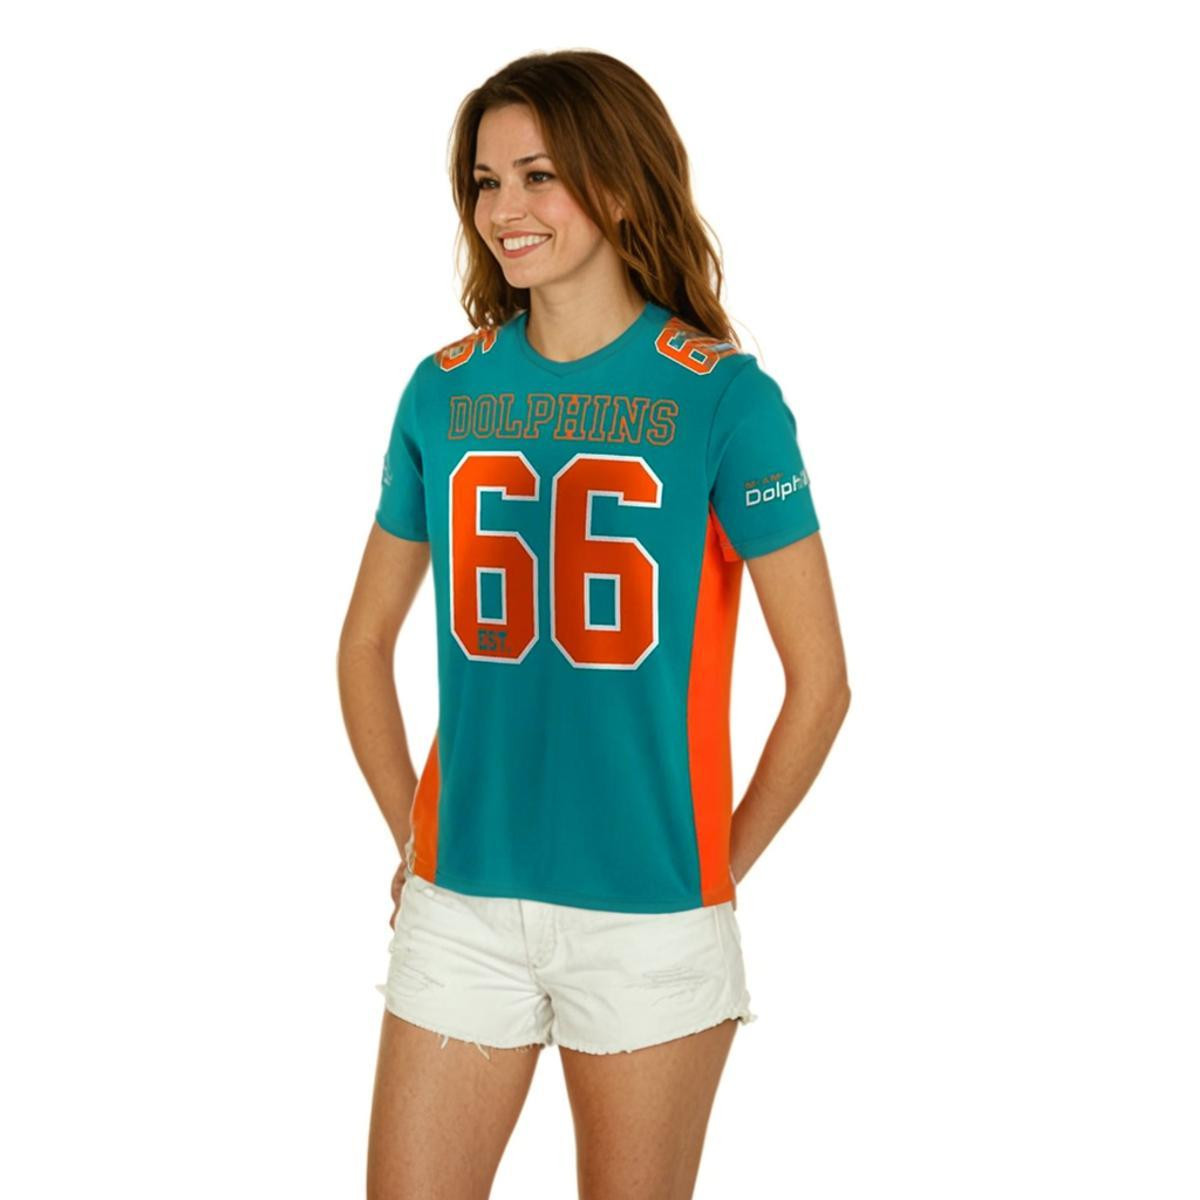 Buy Dolphins jersey